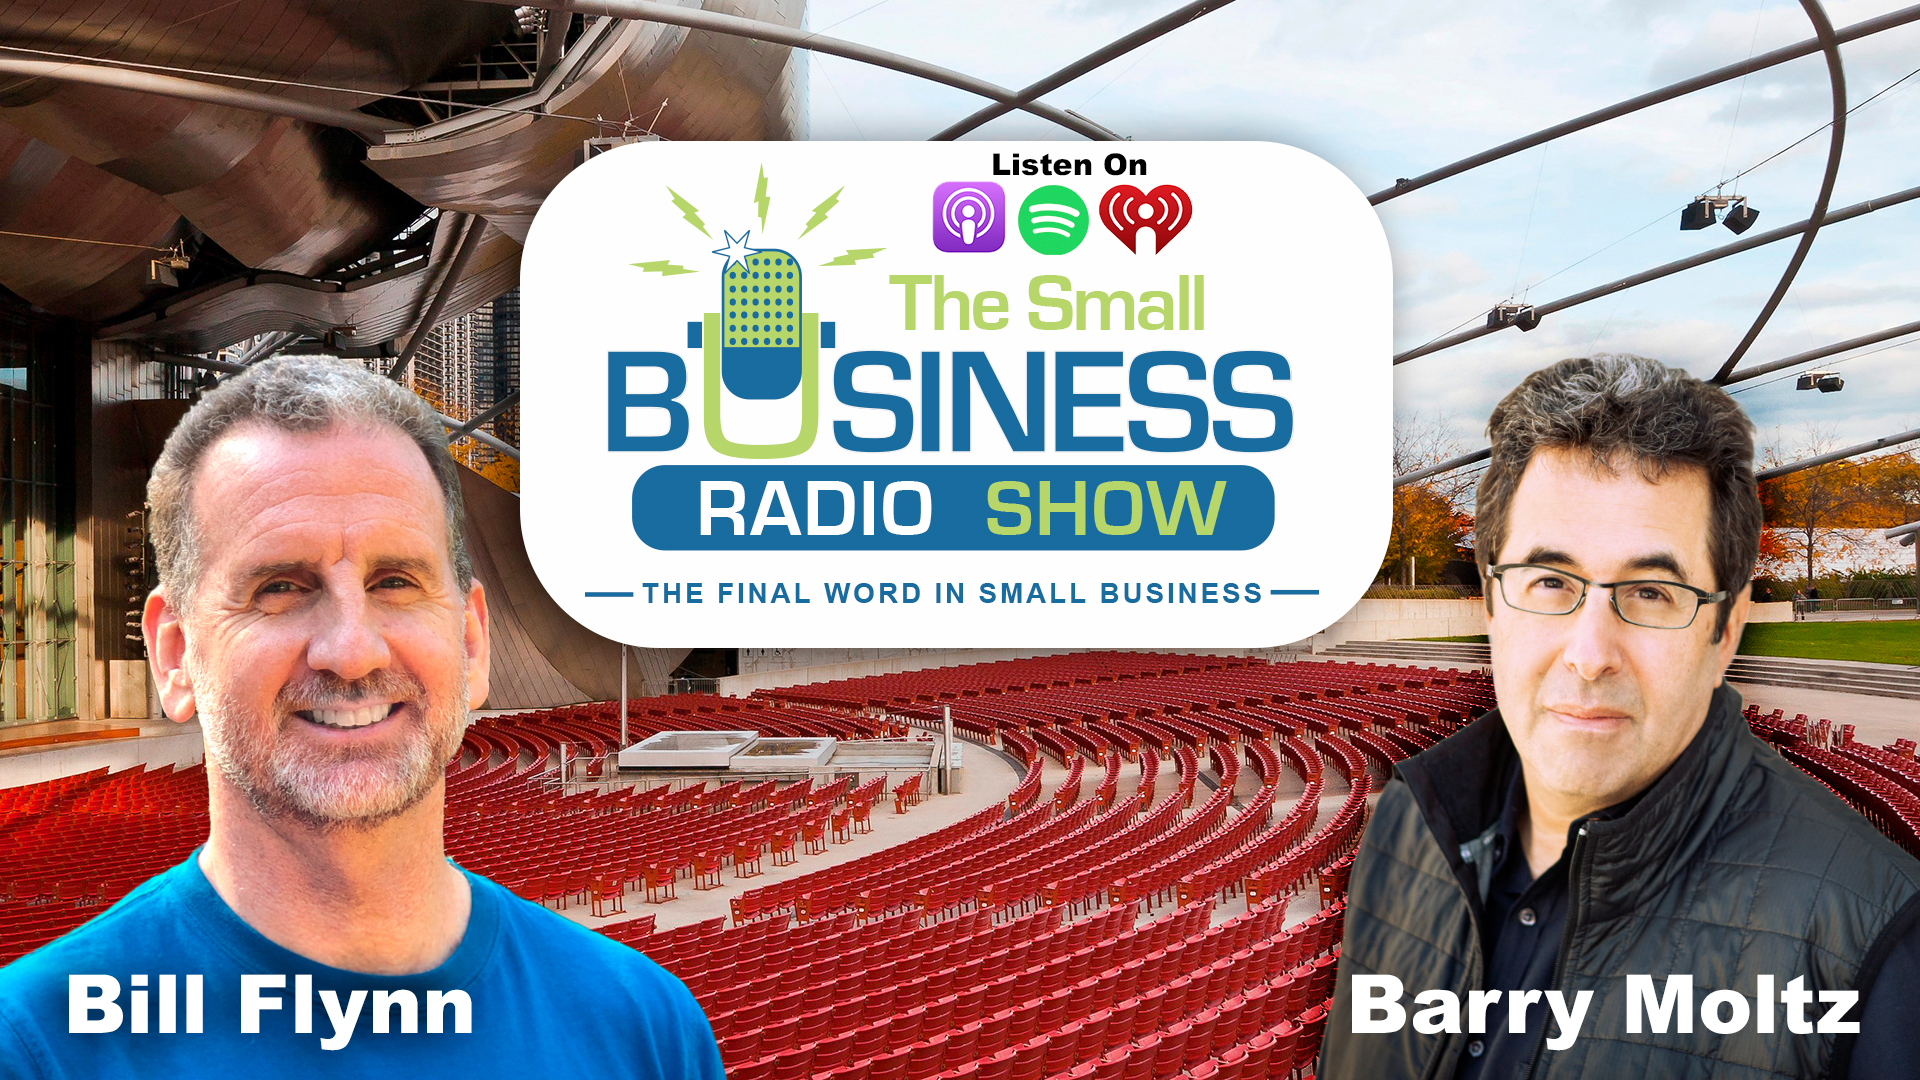 Bill Flynn on The Small Business Radio Show